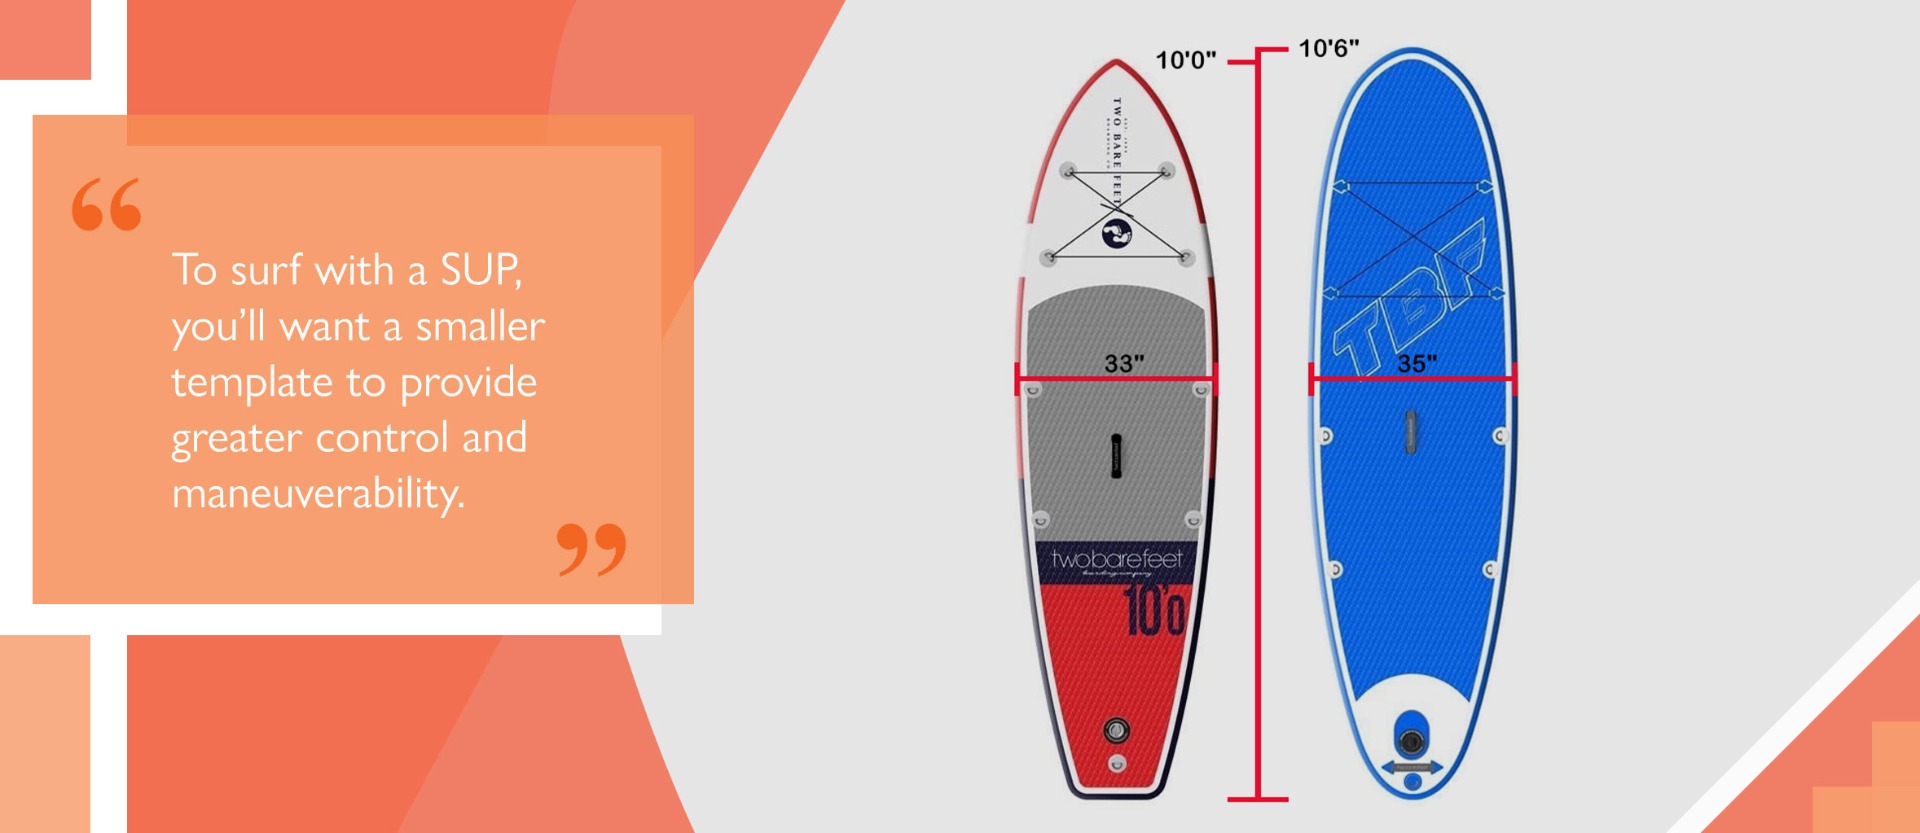 Diagram comparing dimensions of a Two Bare Feet inflatable surf SUP against an all-rounder iSUP